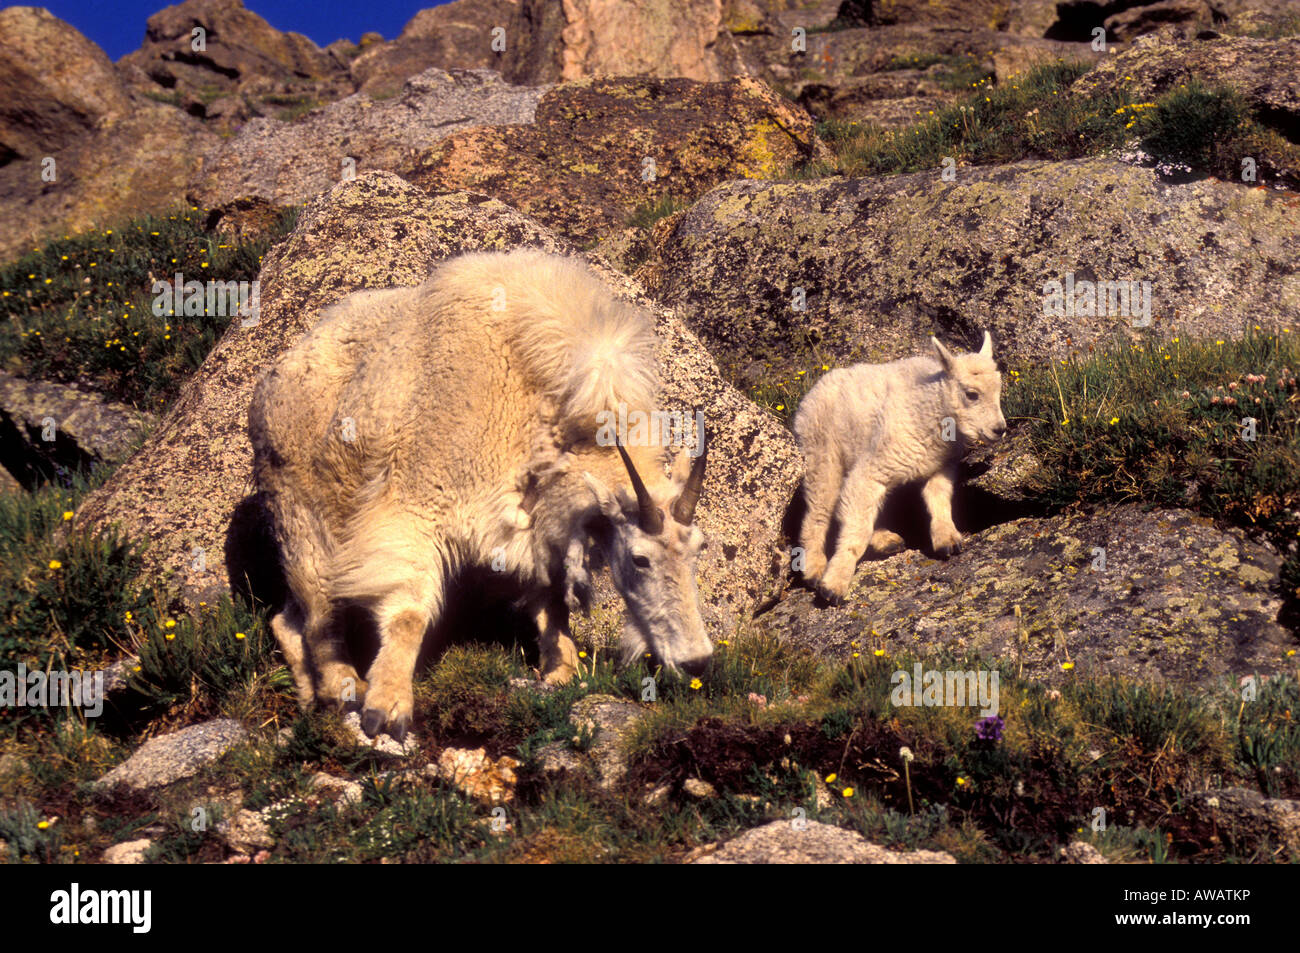 MG-102, MOUNTAIN GOAT NANNY AND KID IN ROCKS Stock Photo